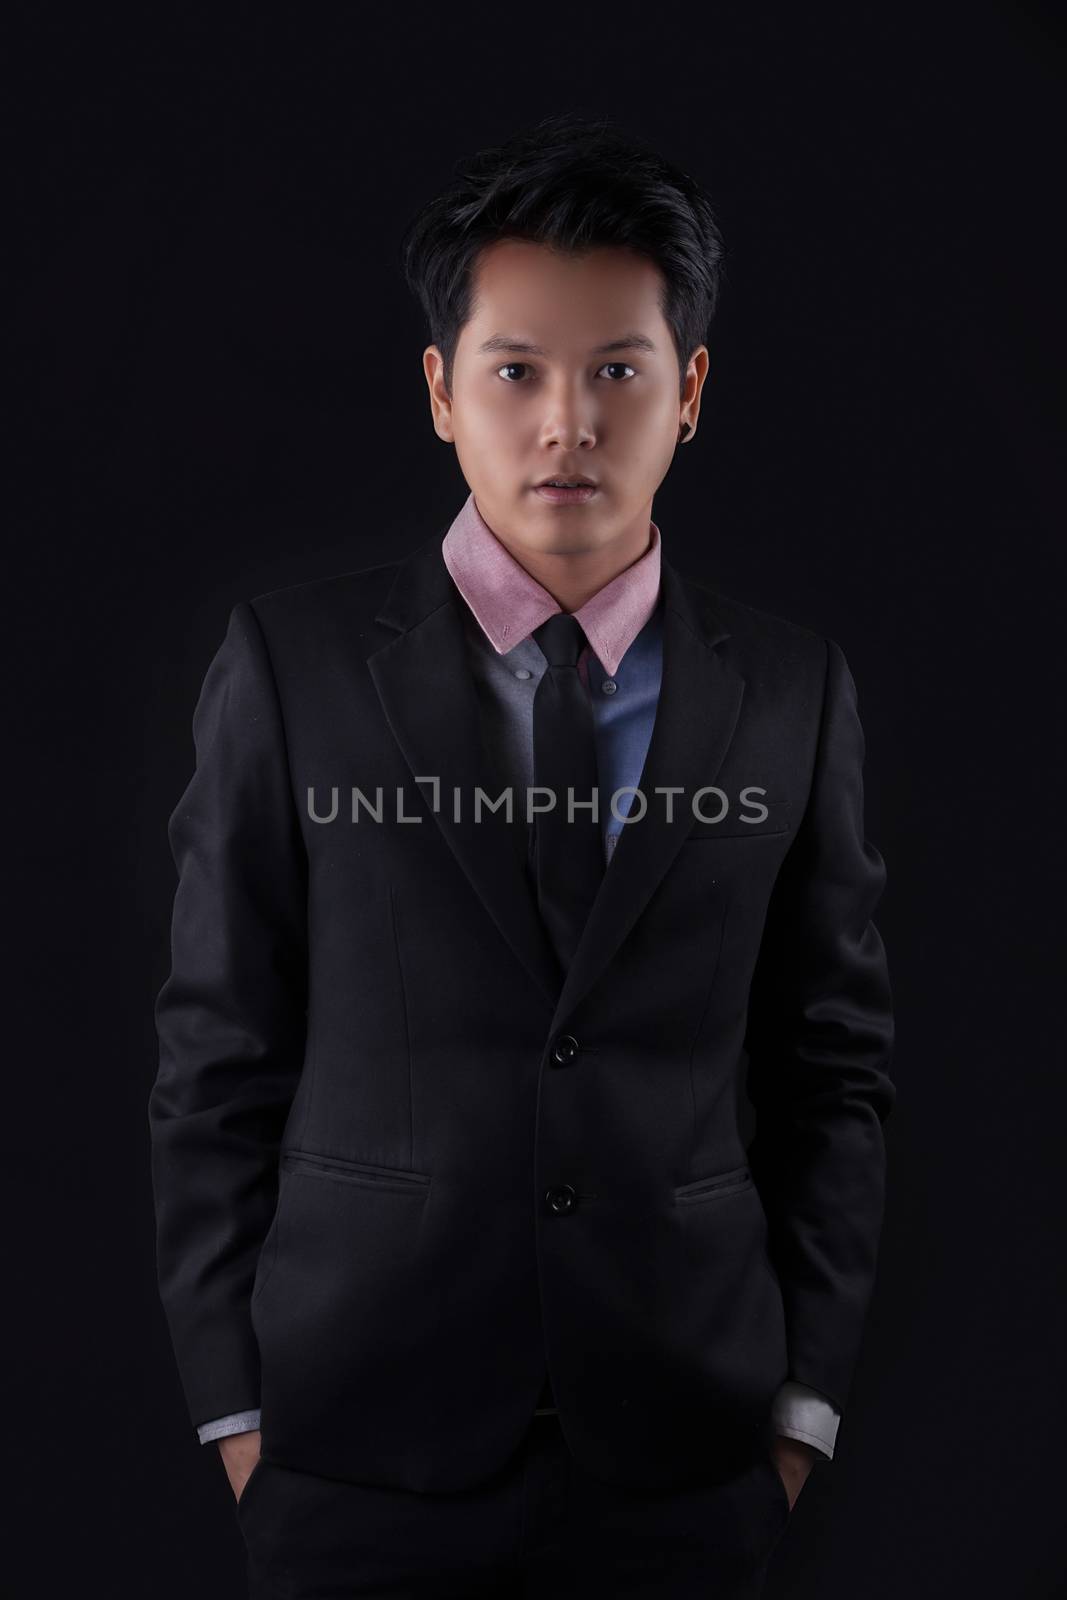 Portrait of Asian young man - Business concept by imagincy